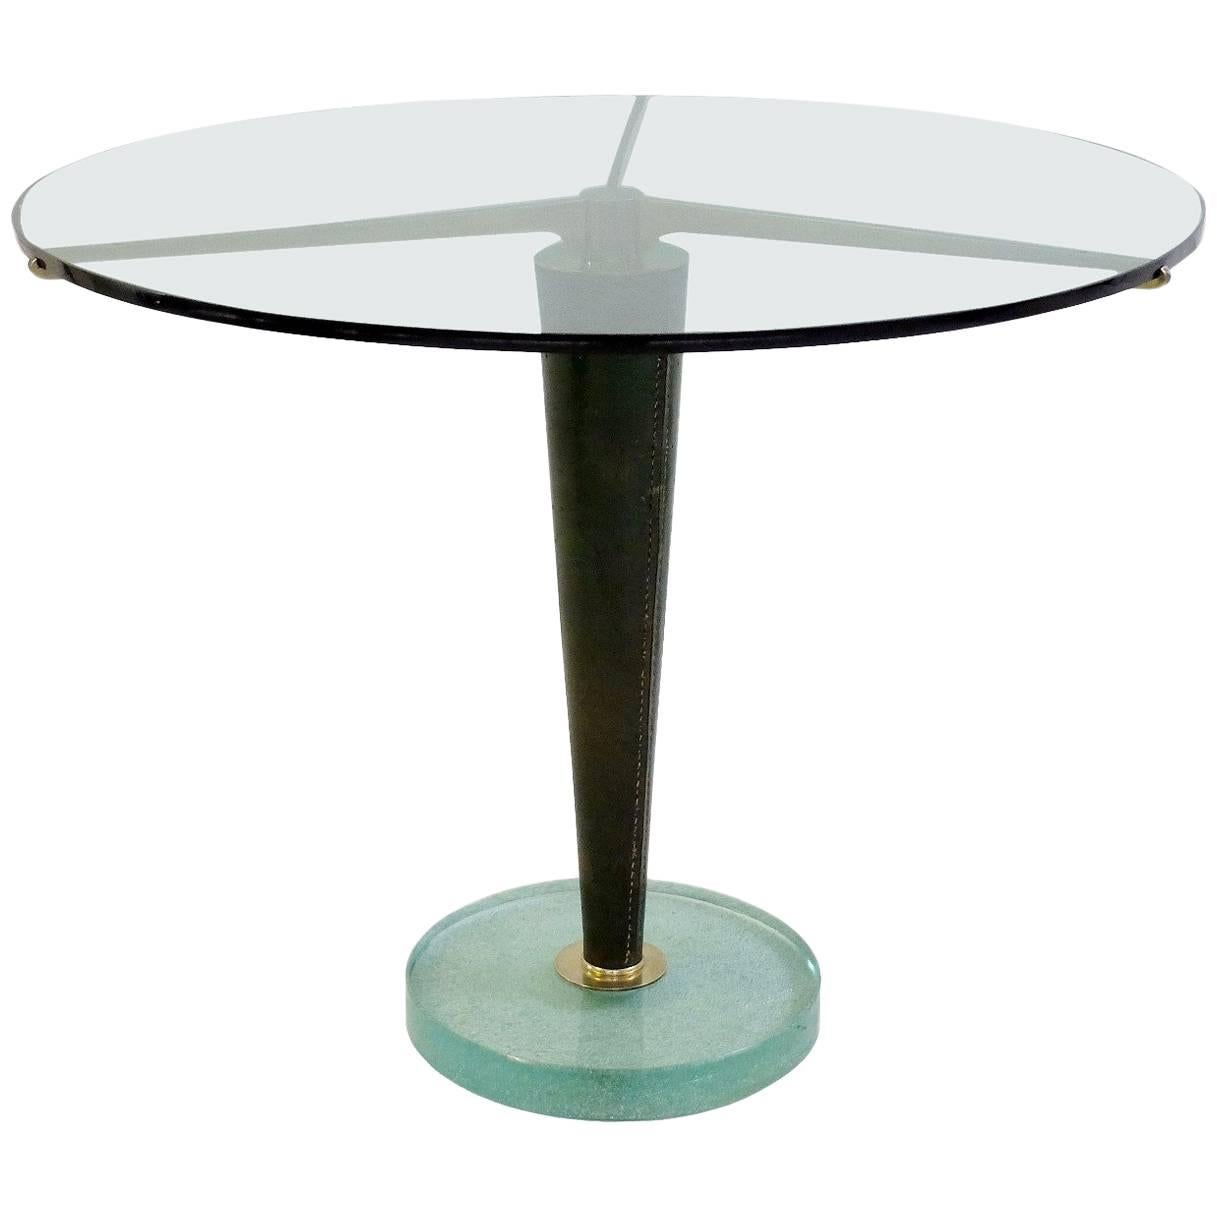 Rare Side Table, Designed for the Arredoluce Showrooms, circa 1950-1959